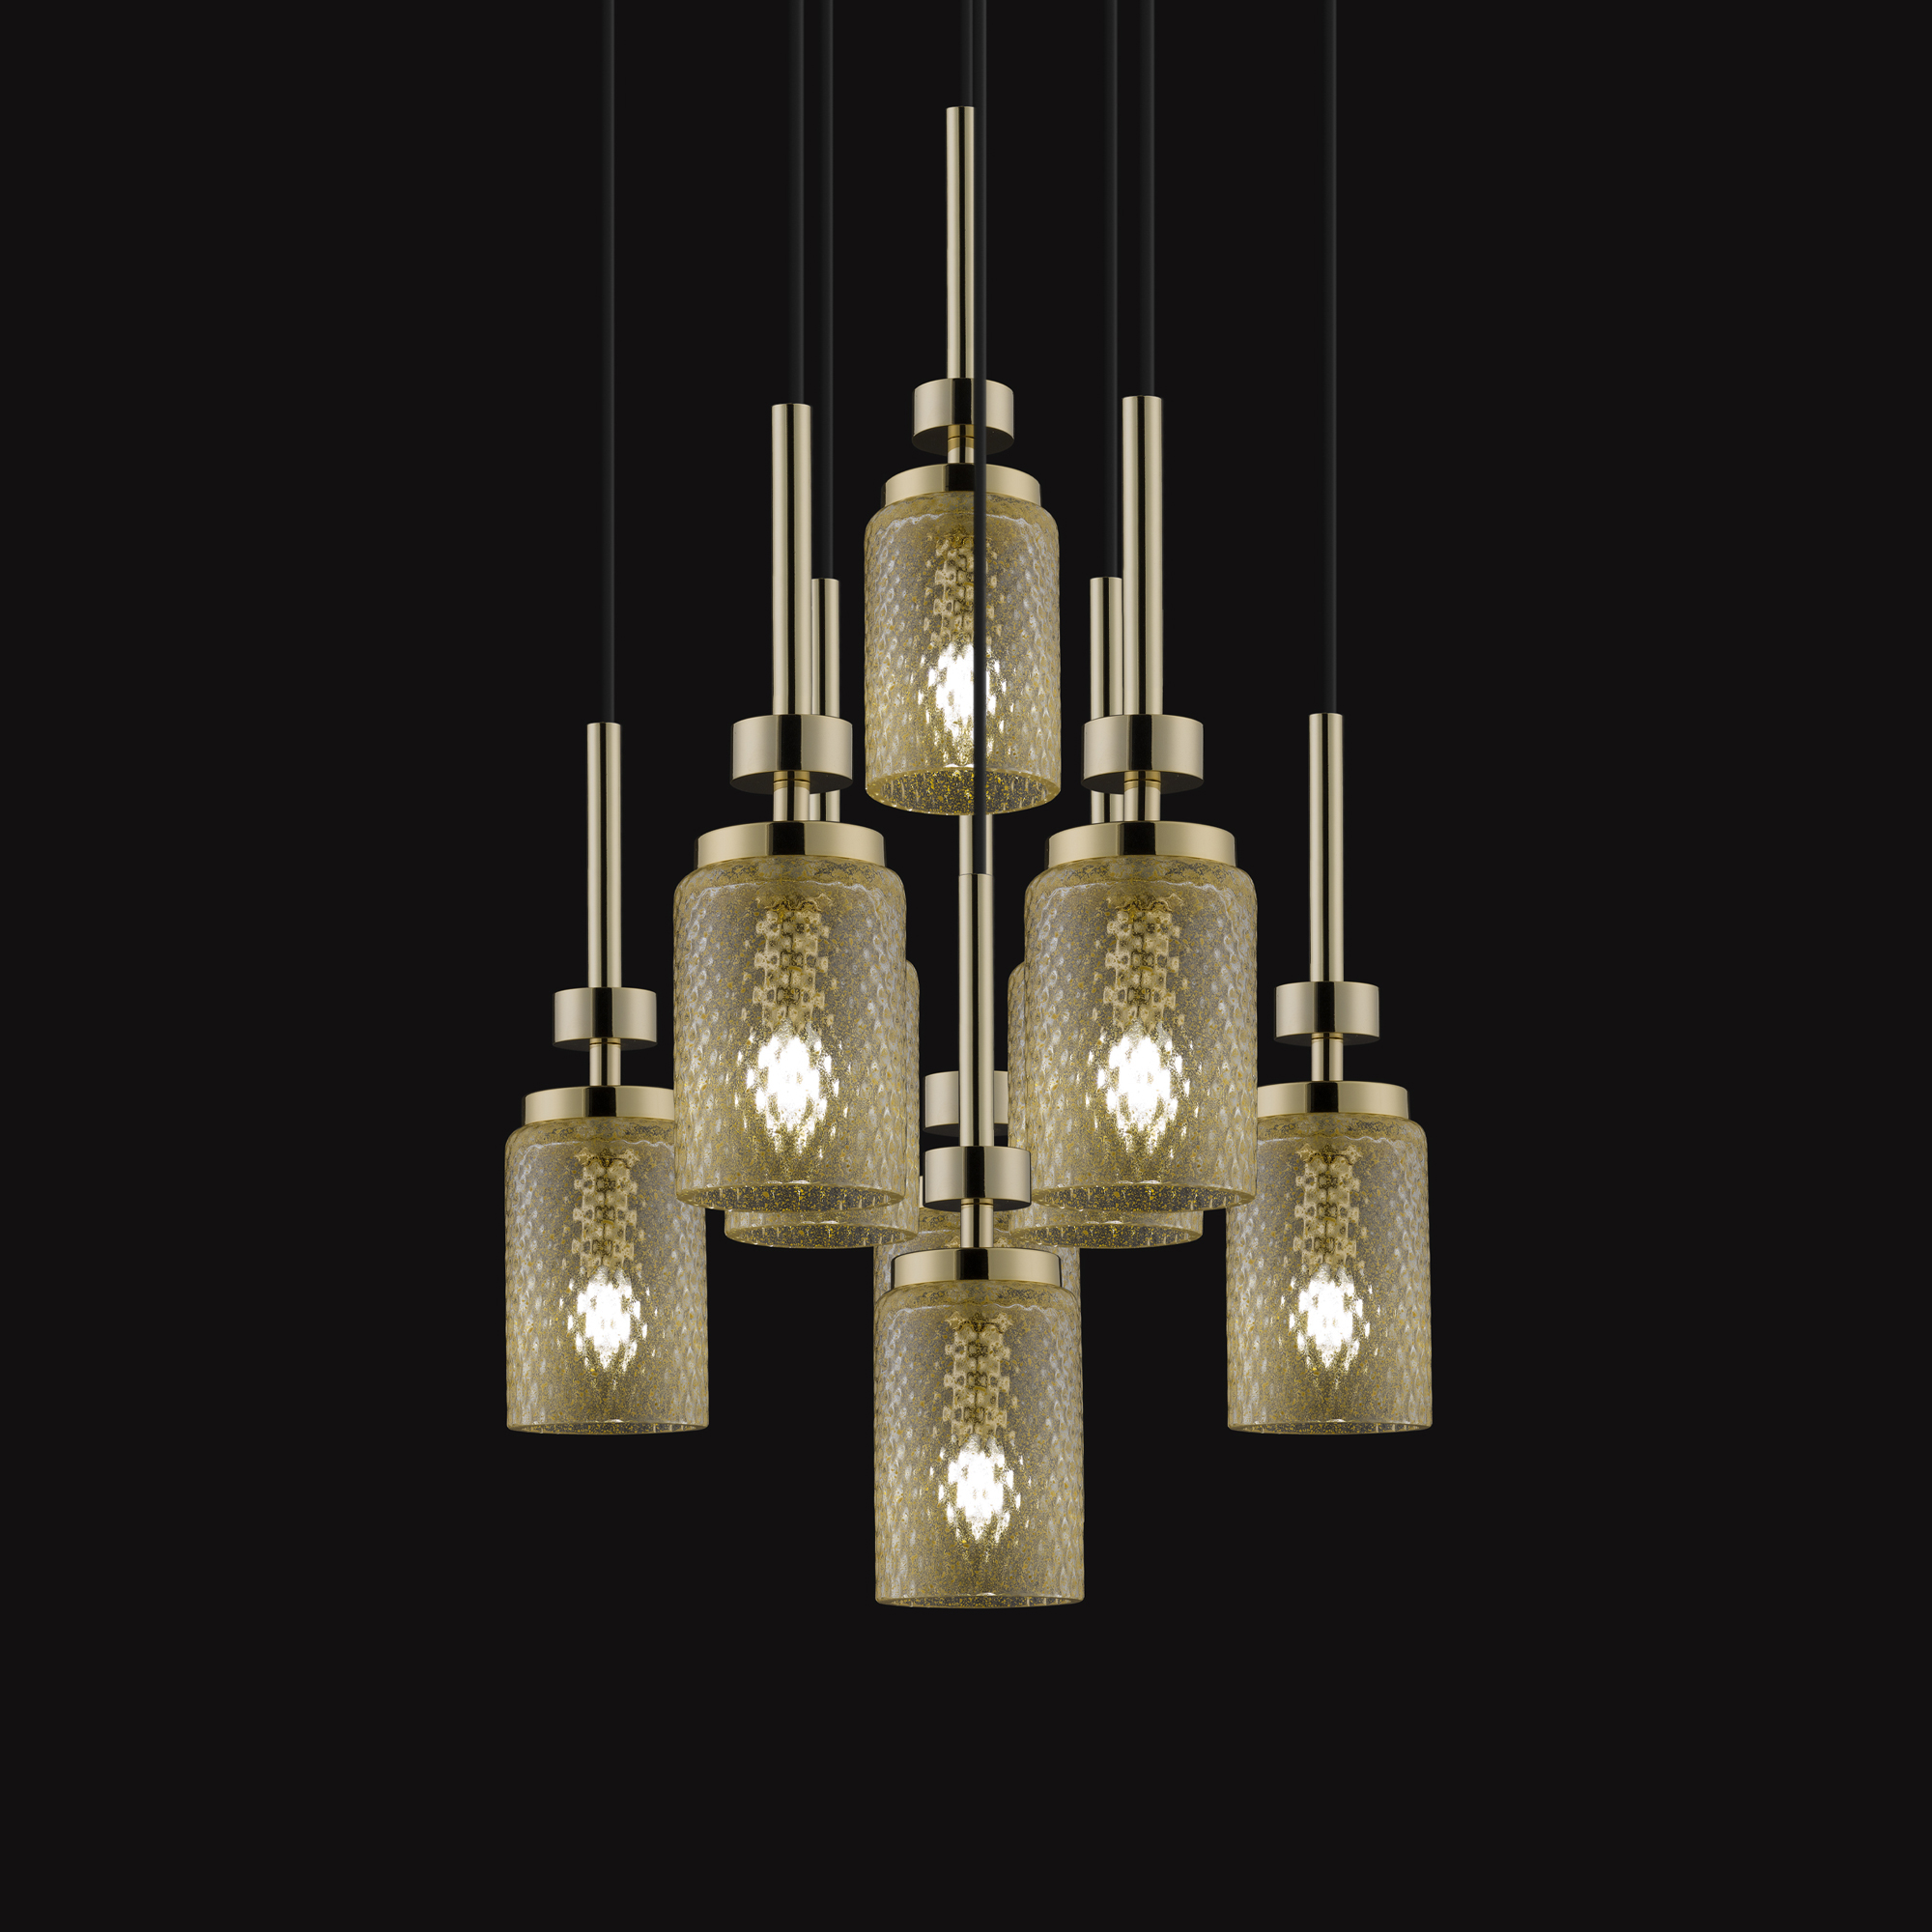 Pendant Light Cluster With Balloton Effect Glass Shades